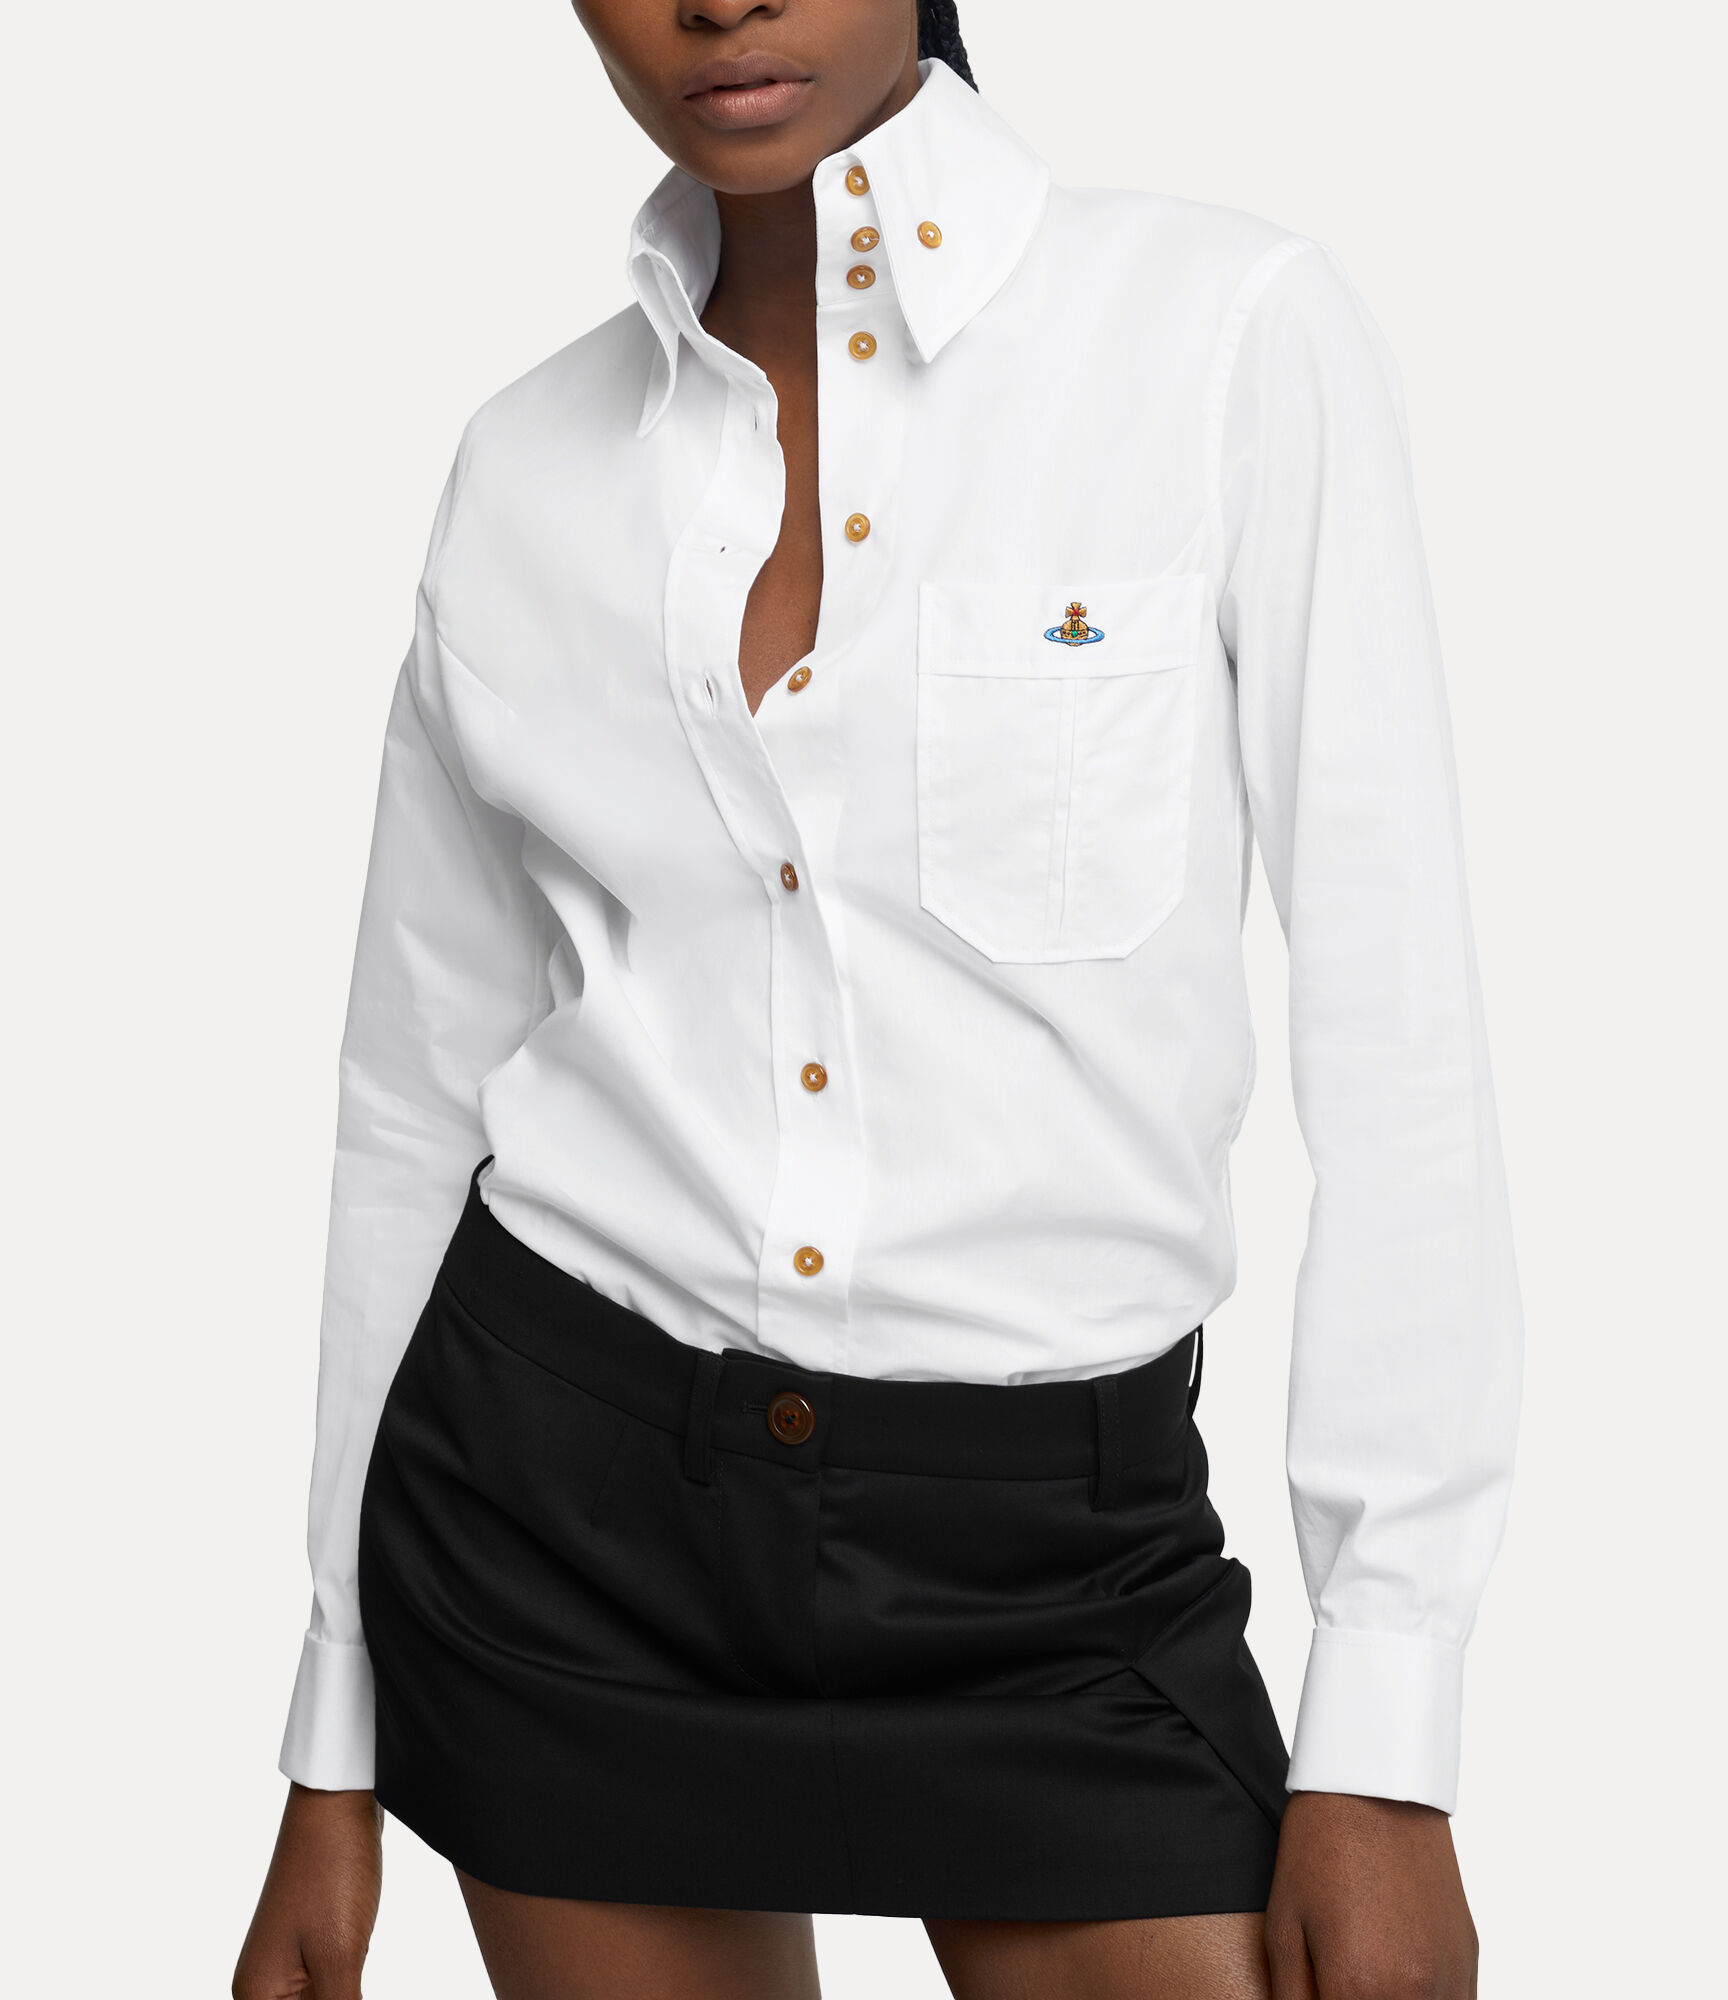 Designer Shirts, Tops and Blouses for Women | Vivienne Westwood®